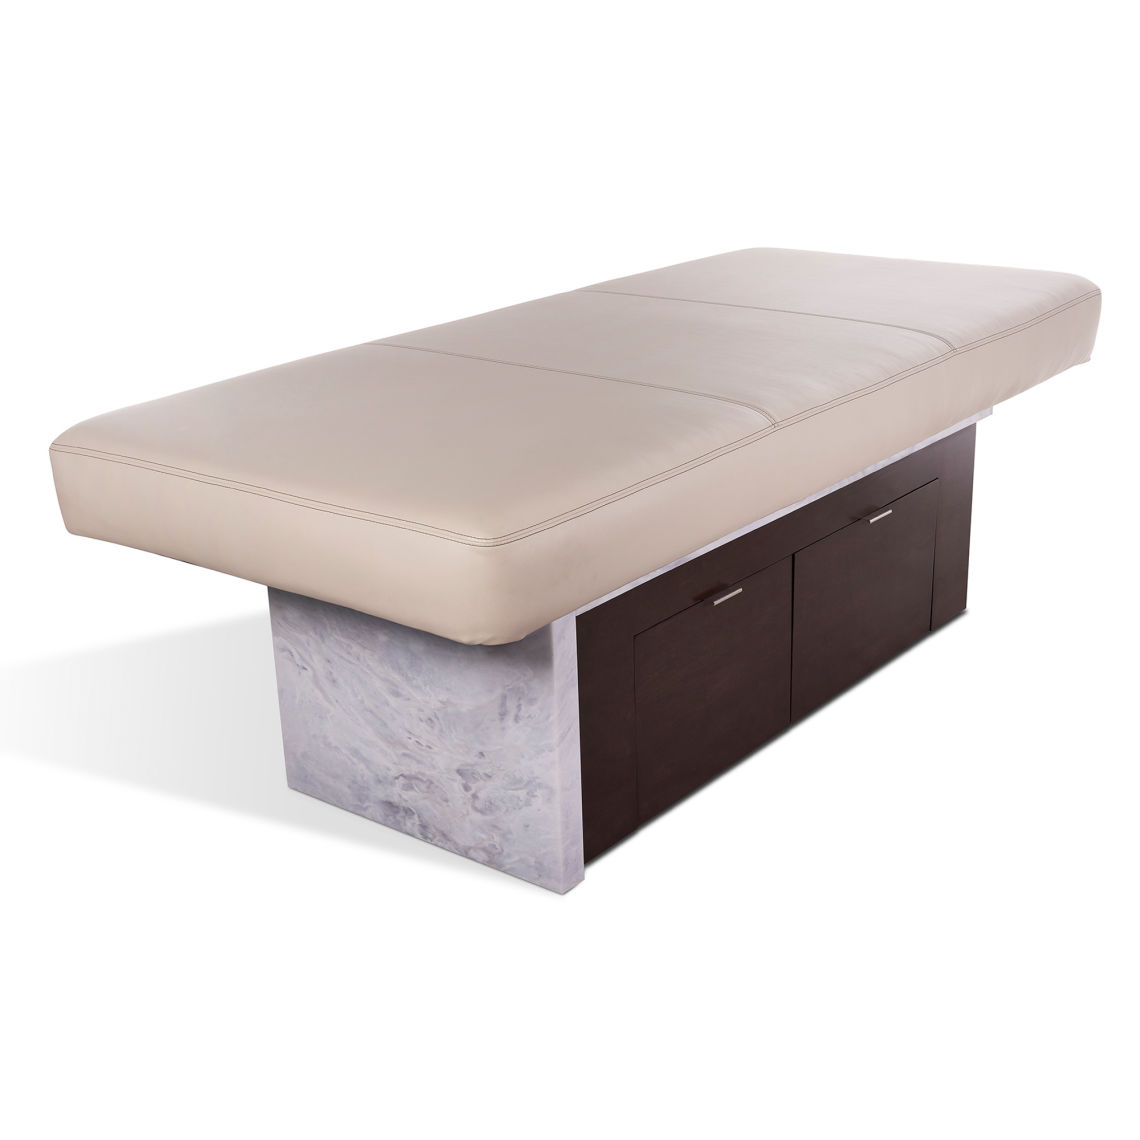 Insignia Waterfall™ Multi-purpose treatment table with replaceable mattress